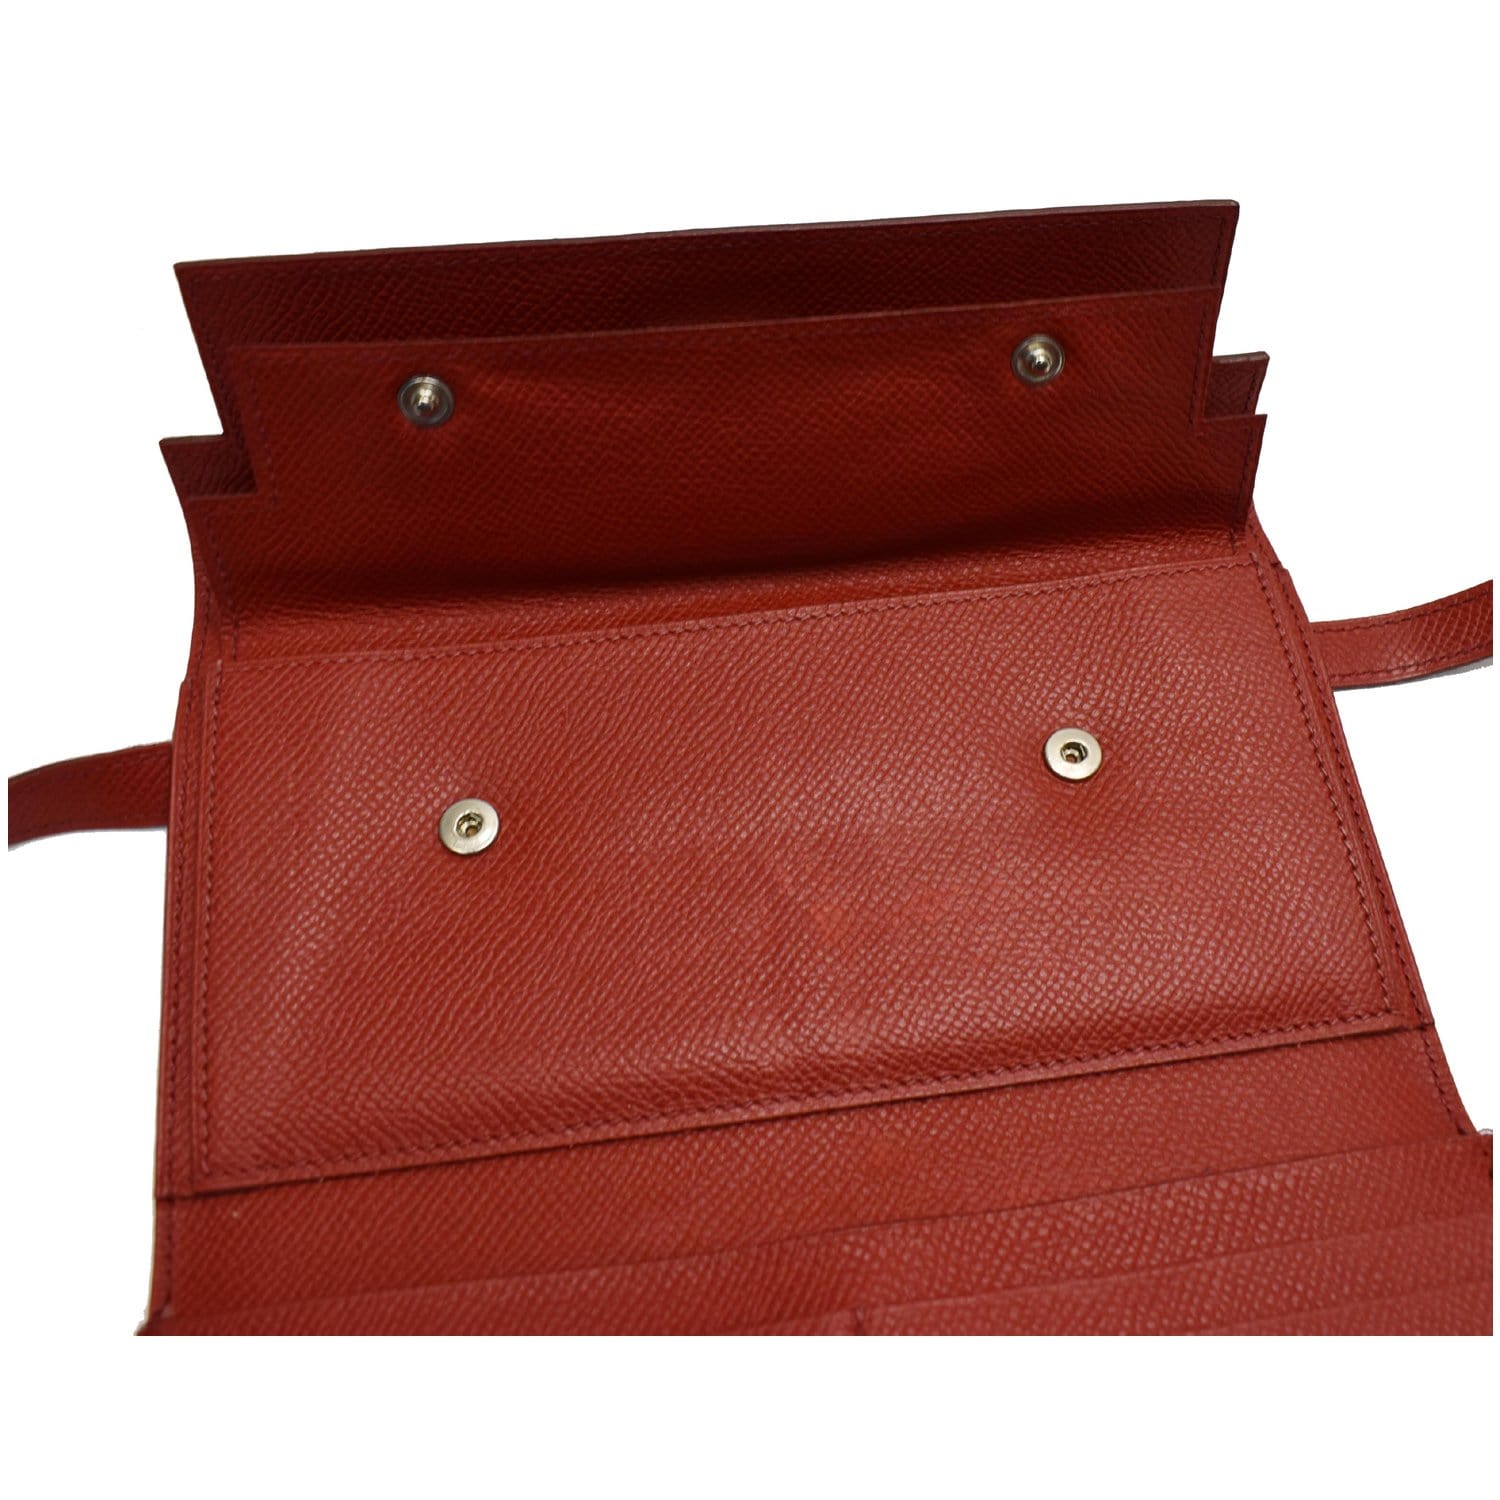 Kelly dépêches leather handbag Hermès Red in Leather - 34118072